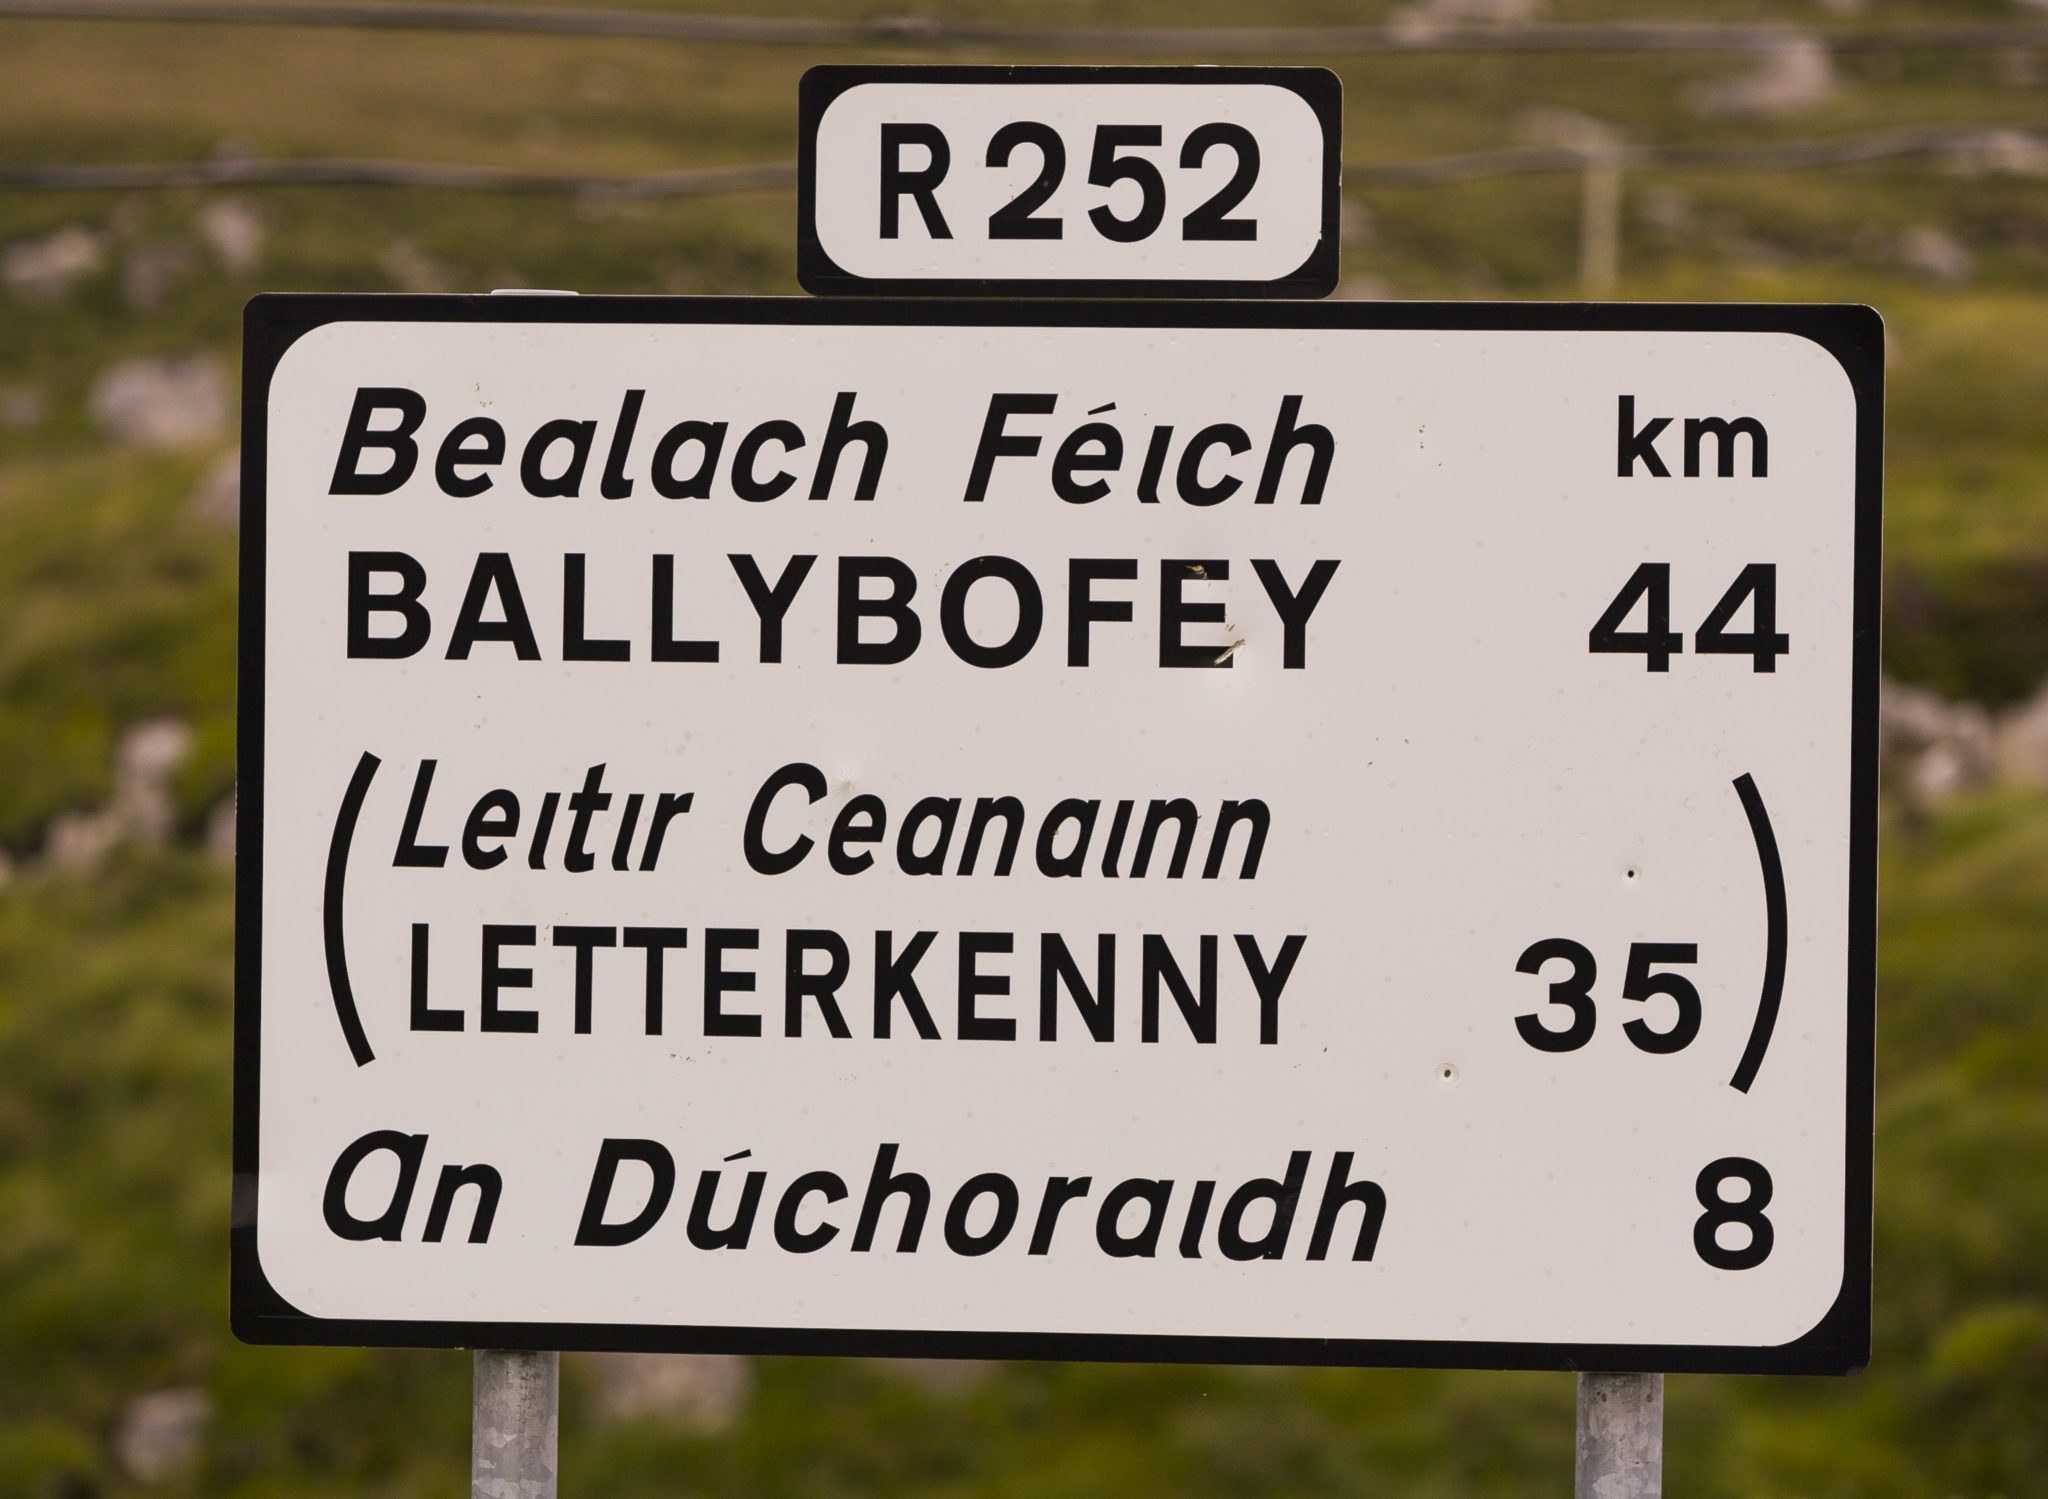 Donegal Councillor applauds graffiti over English place names